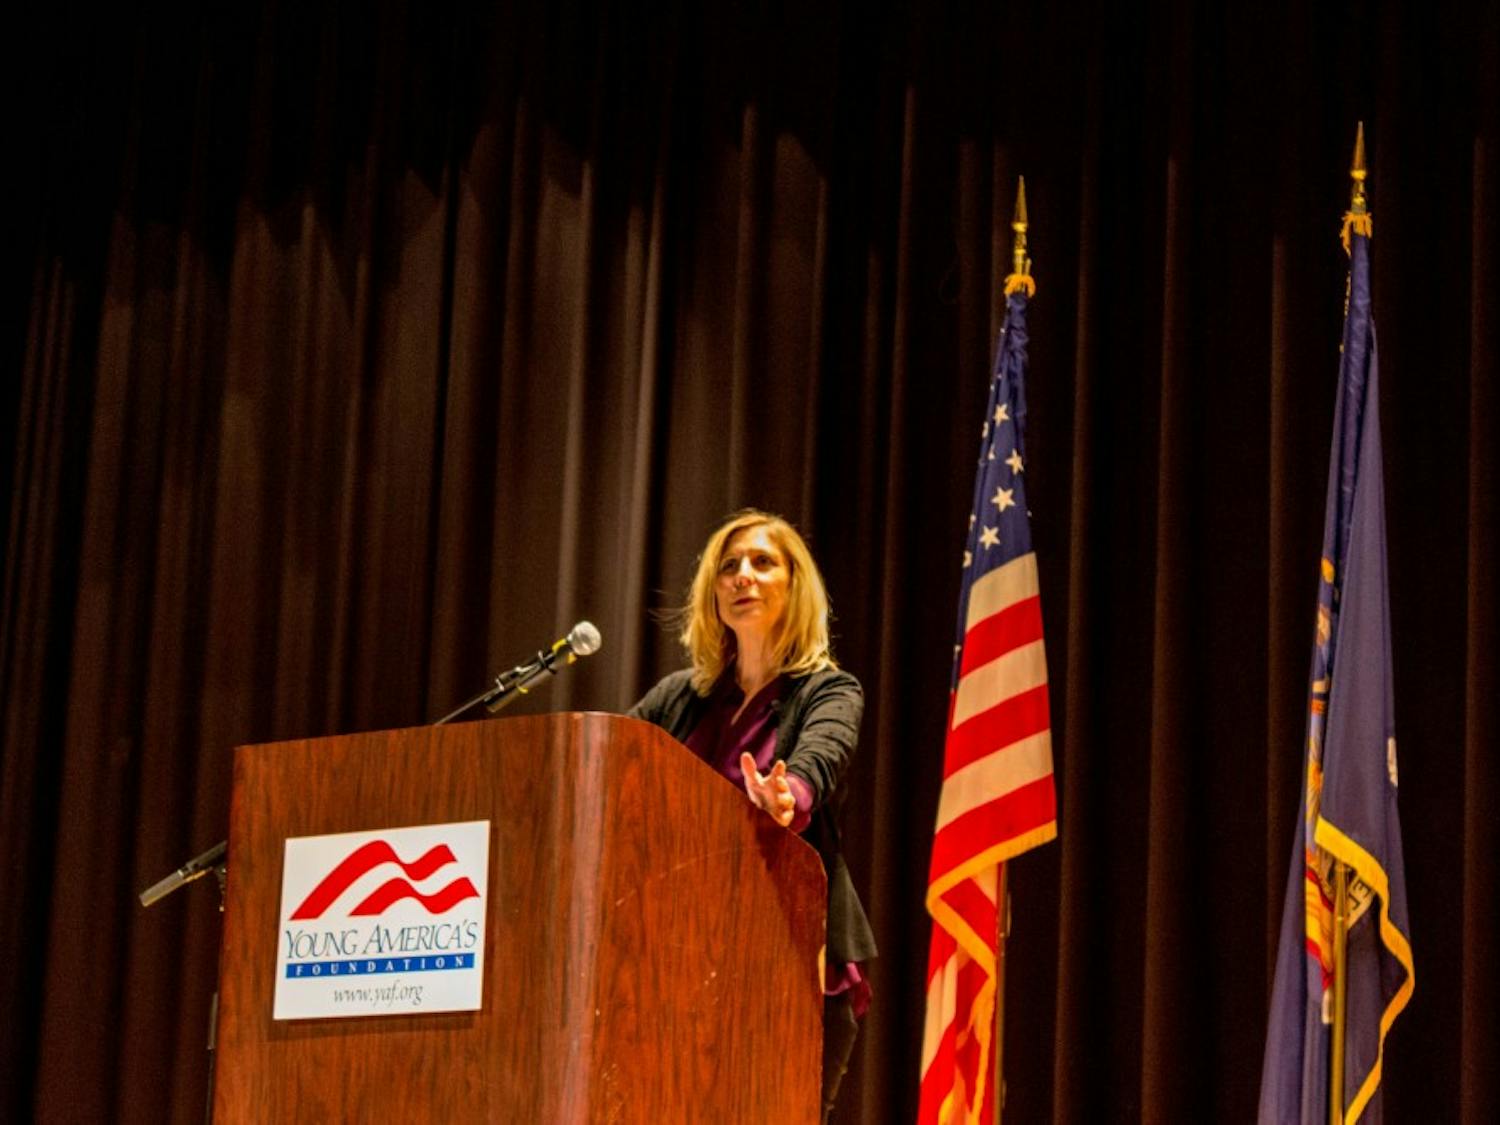 Sommers, a self-proclaimed “equality feminist,” spoke about rape culture, toxic masculinity and the importance of factual information on Tuesday night.